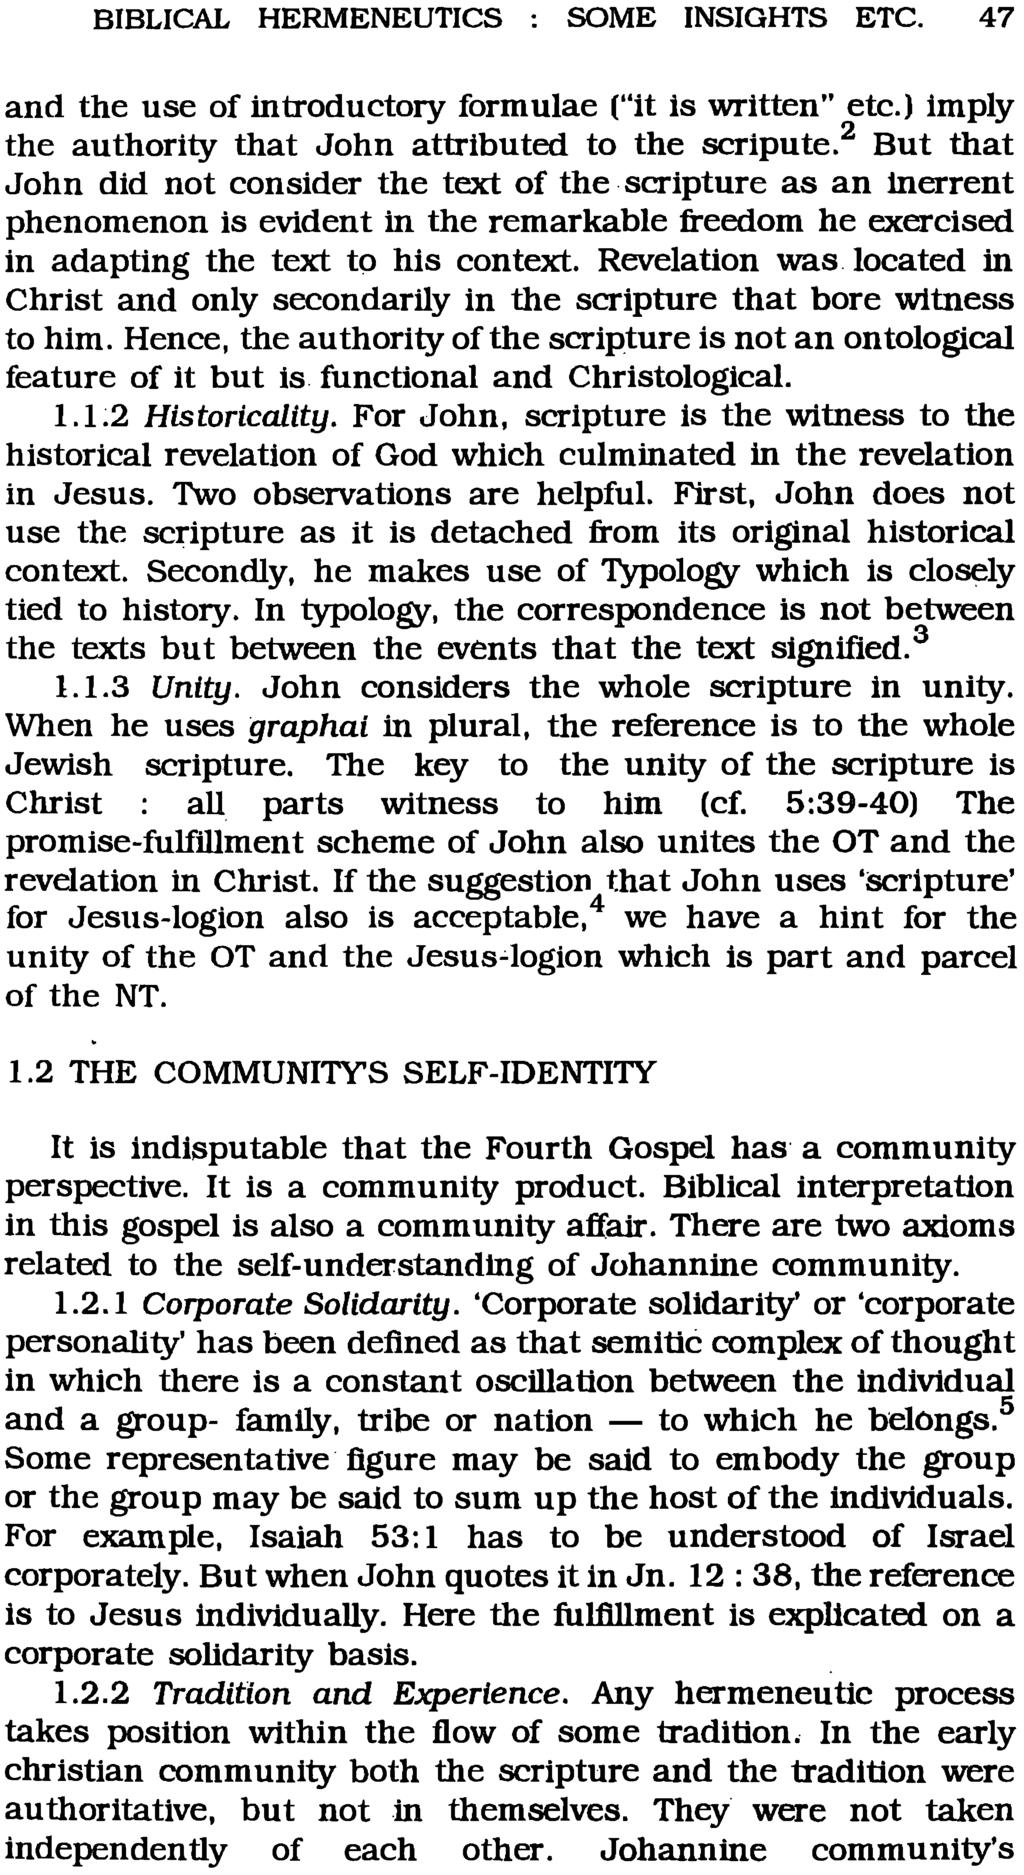 BIBLICAL HERMENEUTICS : SOME INSIGHTS ETC. 47 and the use of introductory formulae ("it is written" etc.) imply the authority that John attributed to the scripute.